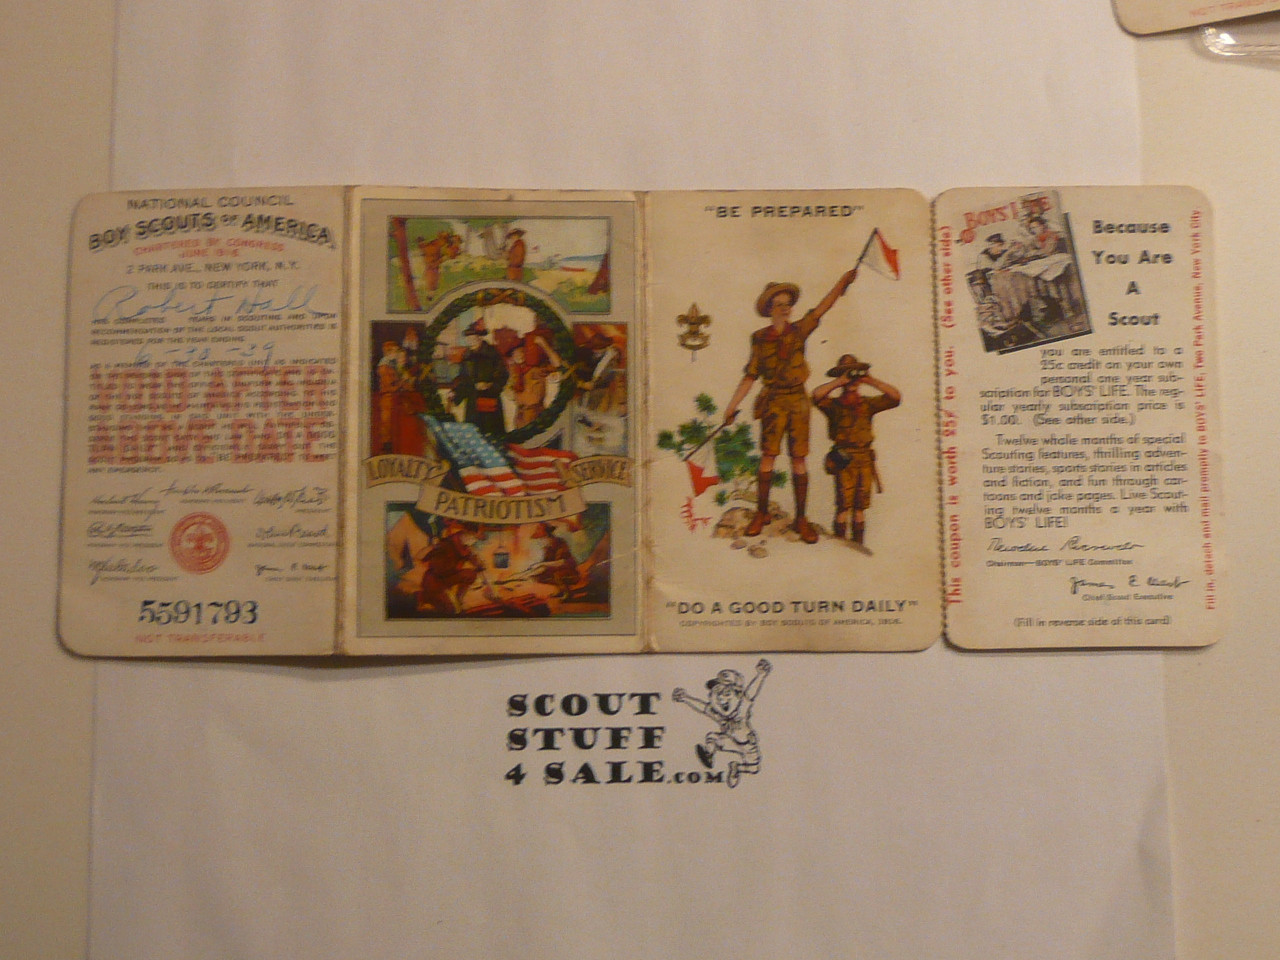 1939 Boy Scout Membership Card, 3-fold, 7 signatures, with RARE 4th perforated fold still attached, expires June 1939, BSMC347